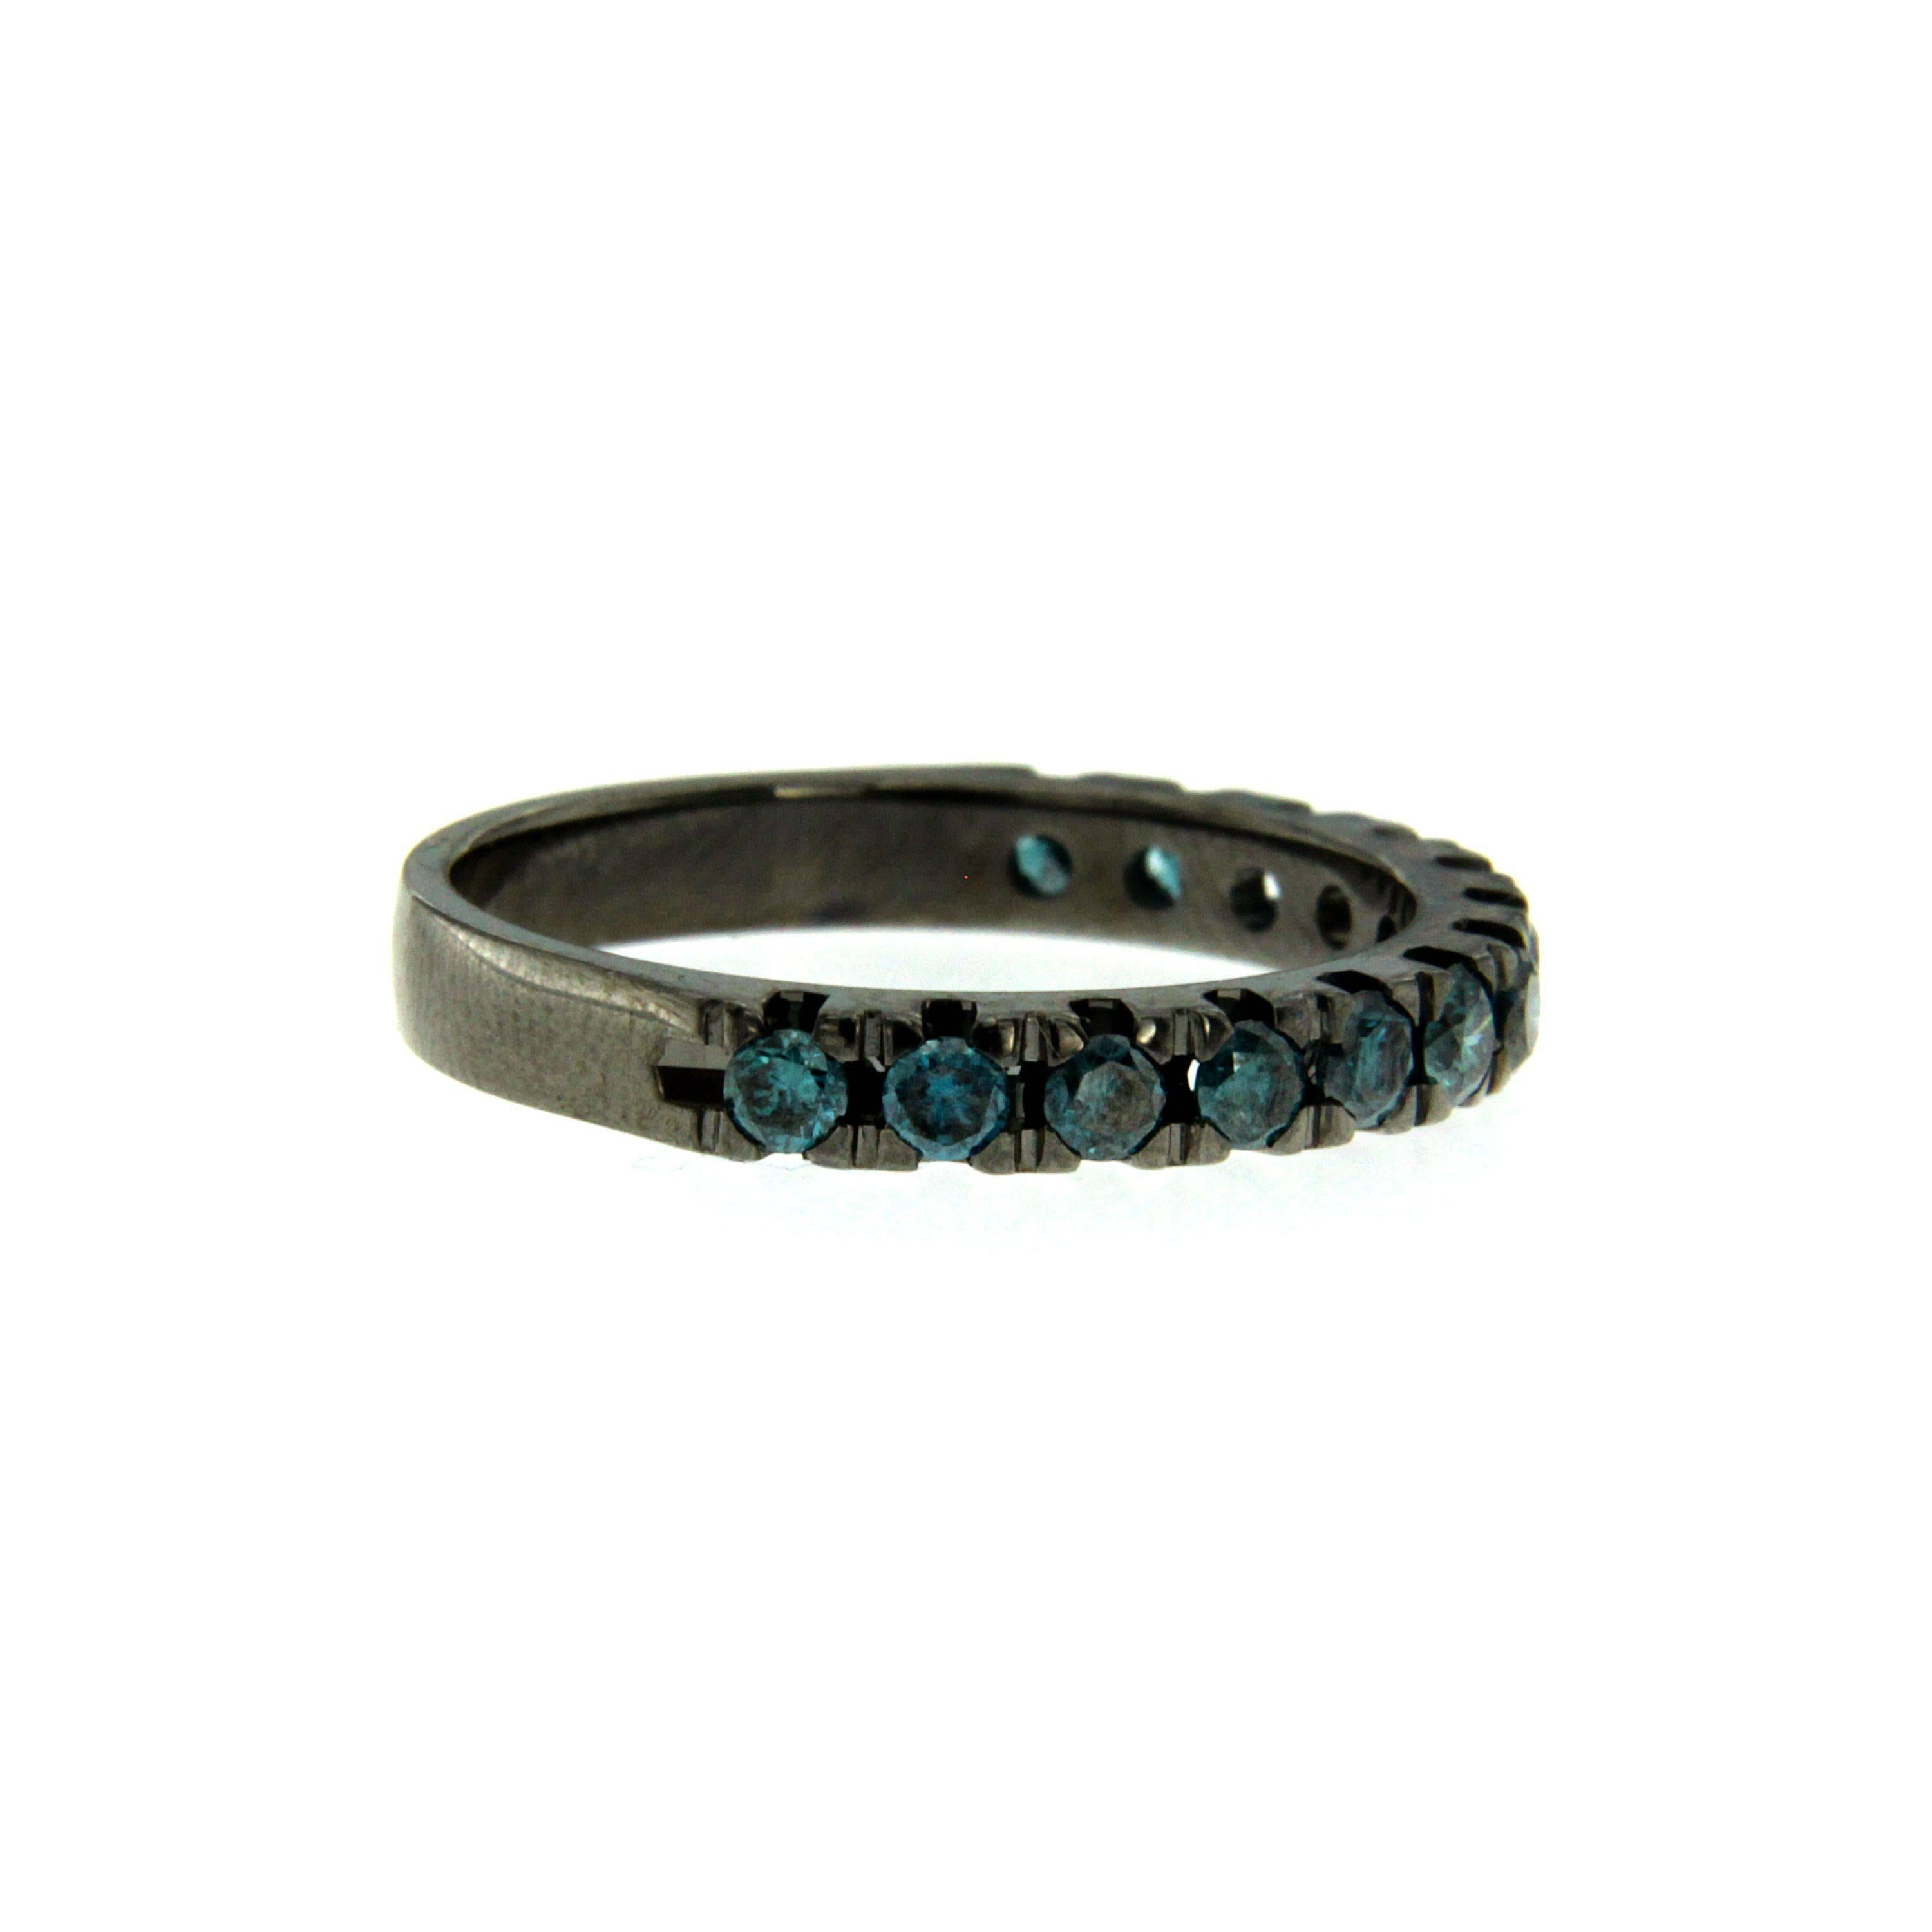 Crafted from 18k black gold this contemporary ring is decorated with a continuous line of 0.70 cts colored blue diamonds along the band. Wear yours alone or stacked with similar styles.

CONDITION: Brand New
METAL: 18k black Gold
GEM STONE: Colored